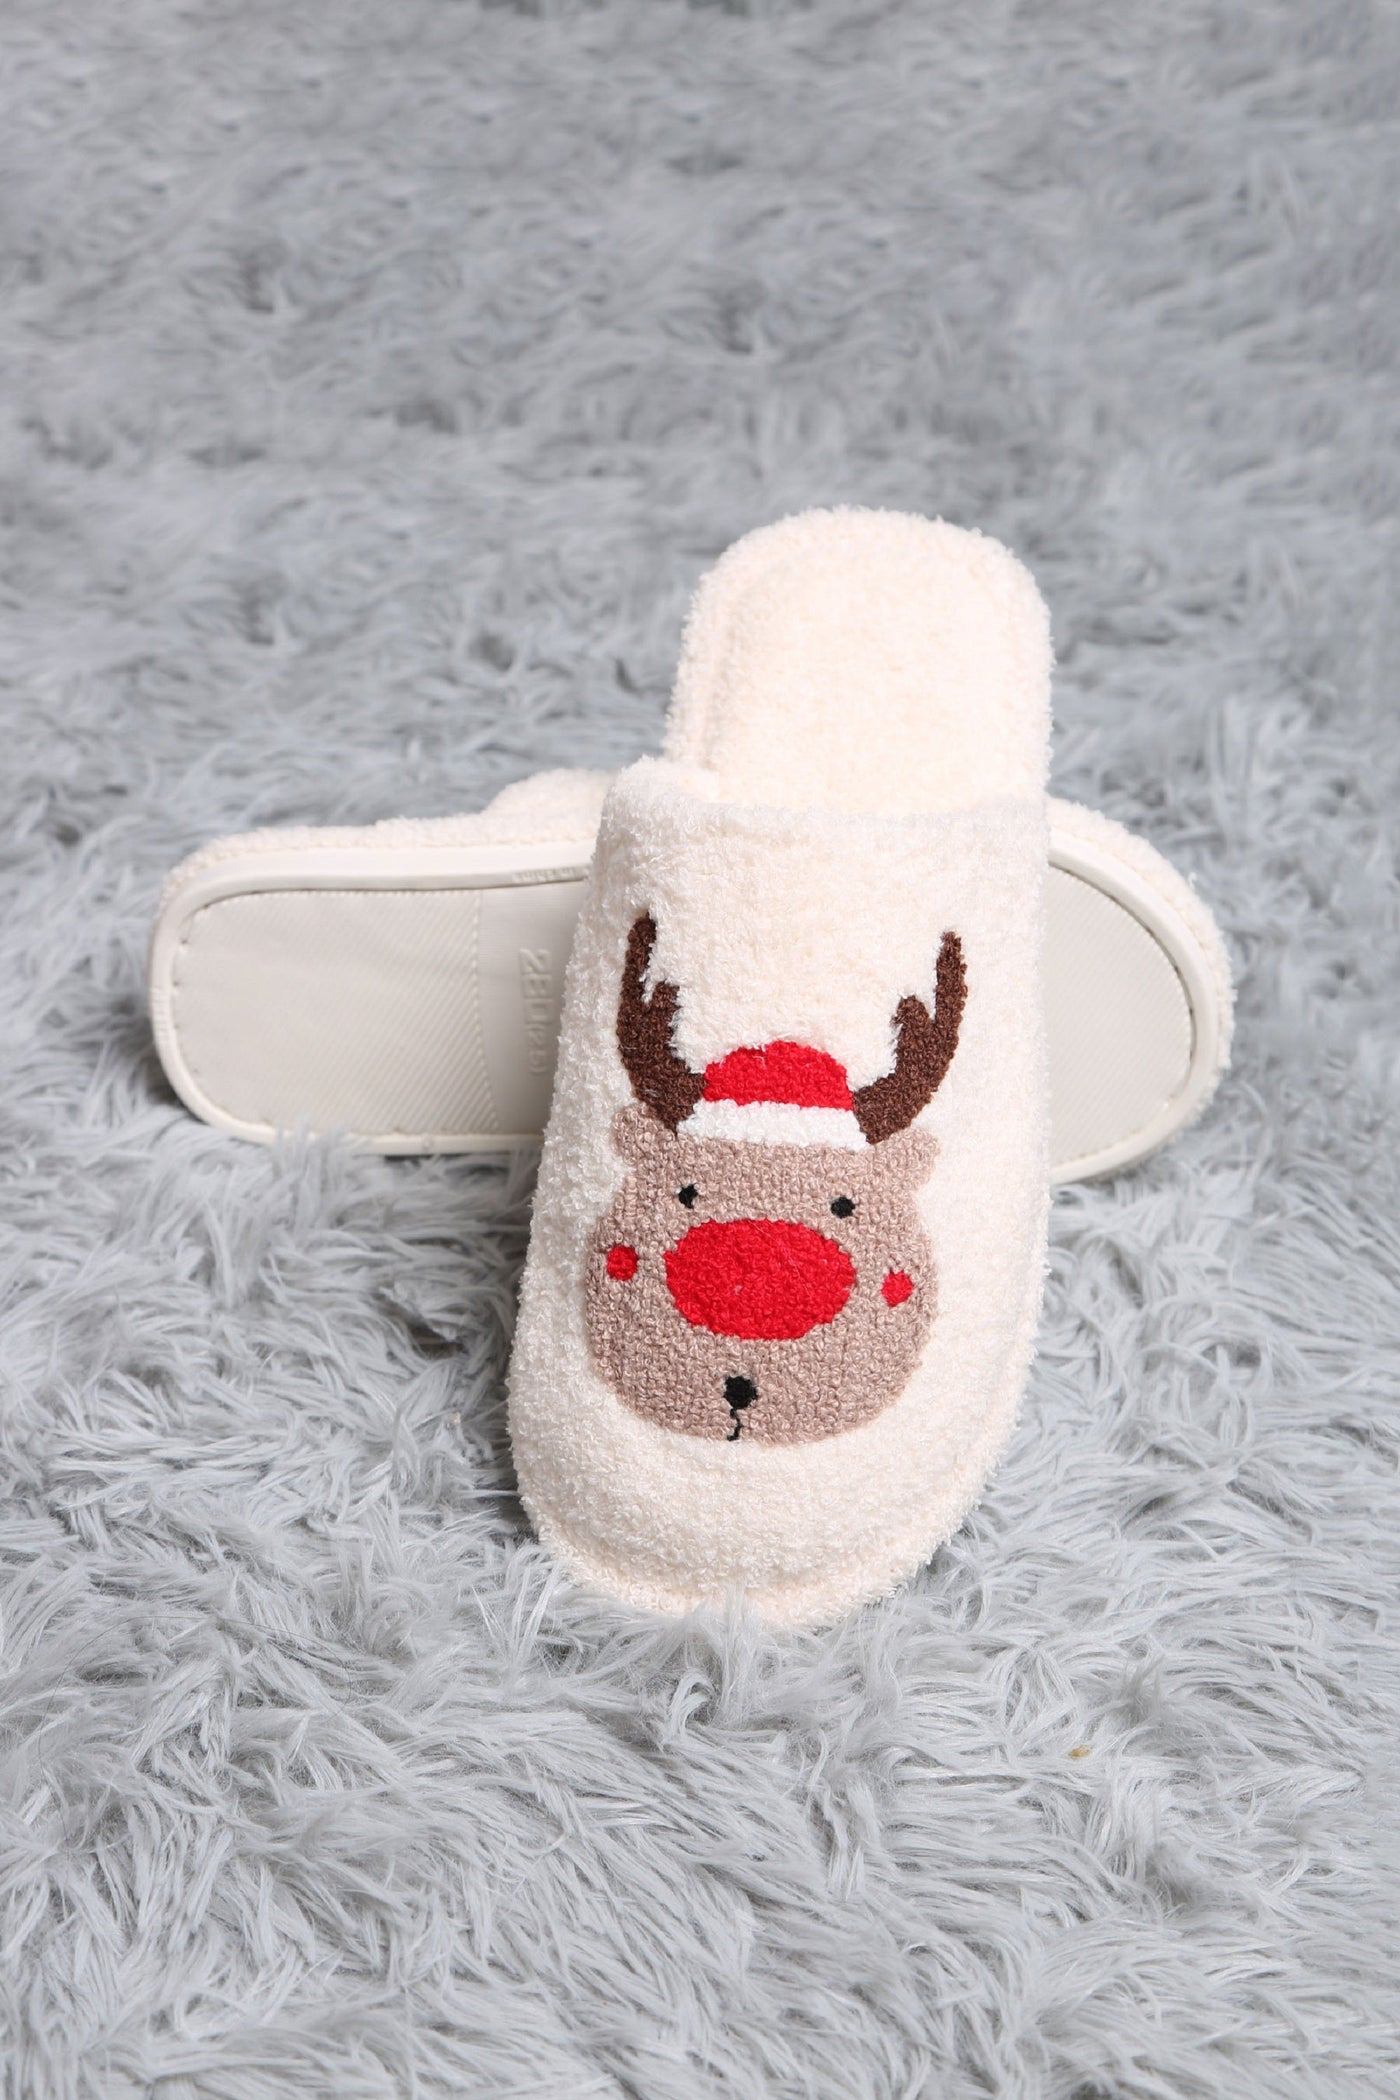 JCL4205-03 Super Lux Reindeer Slippers